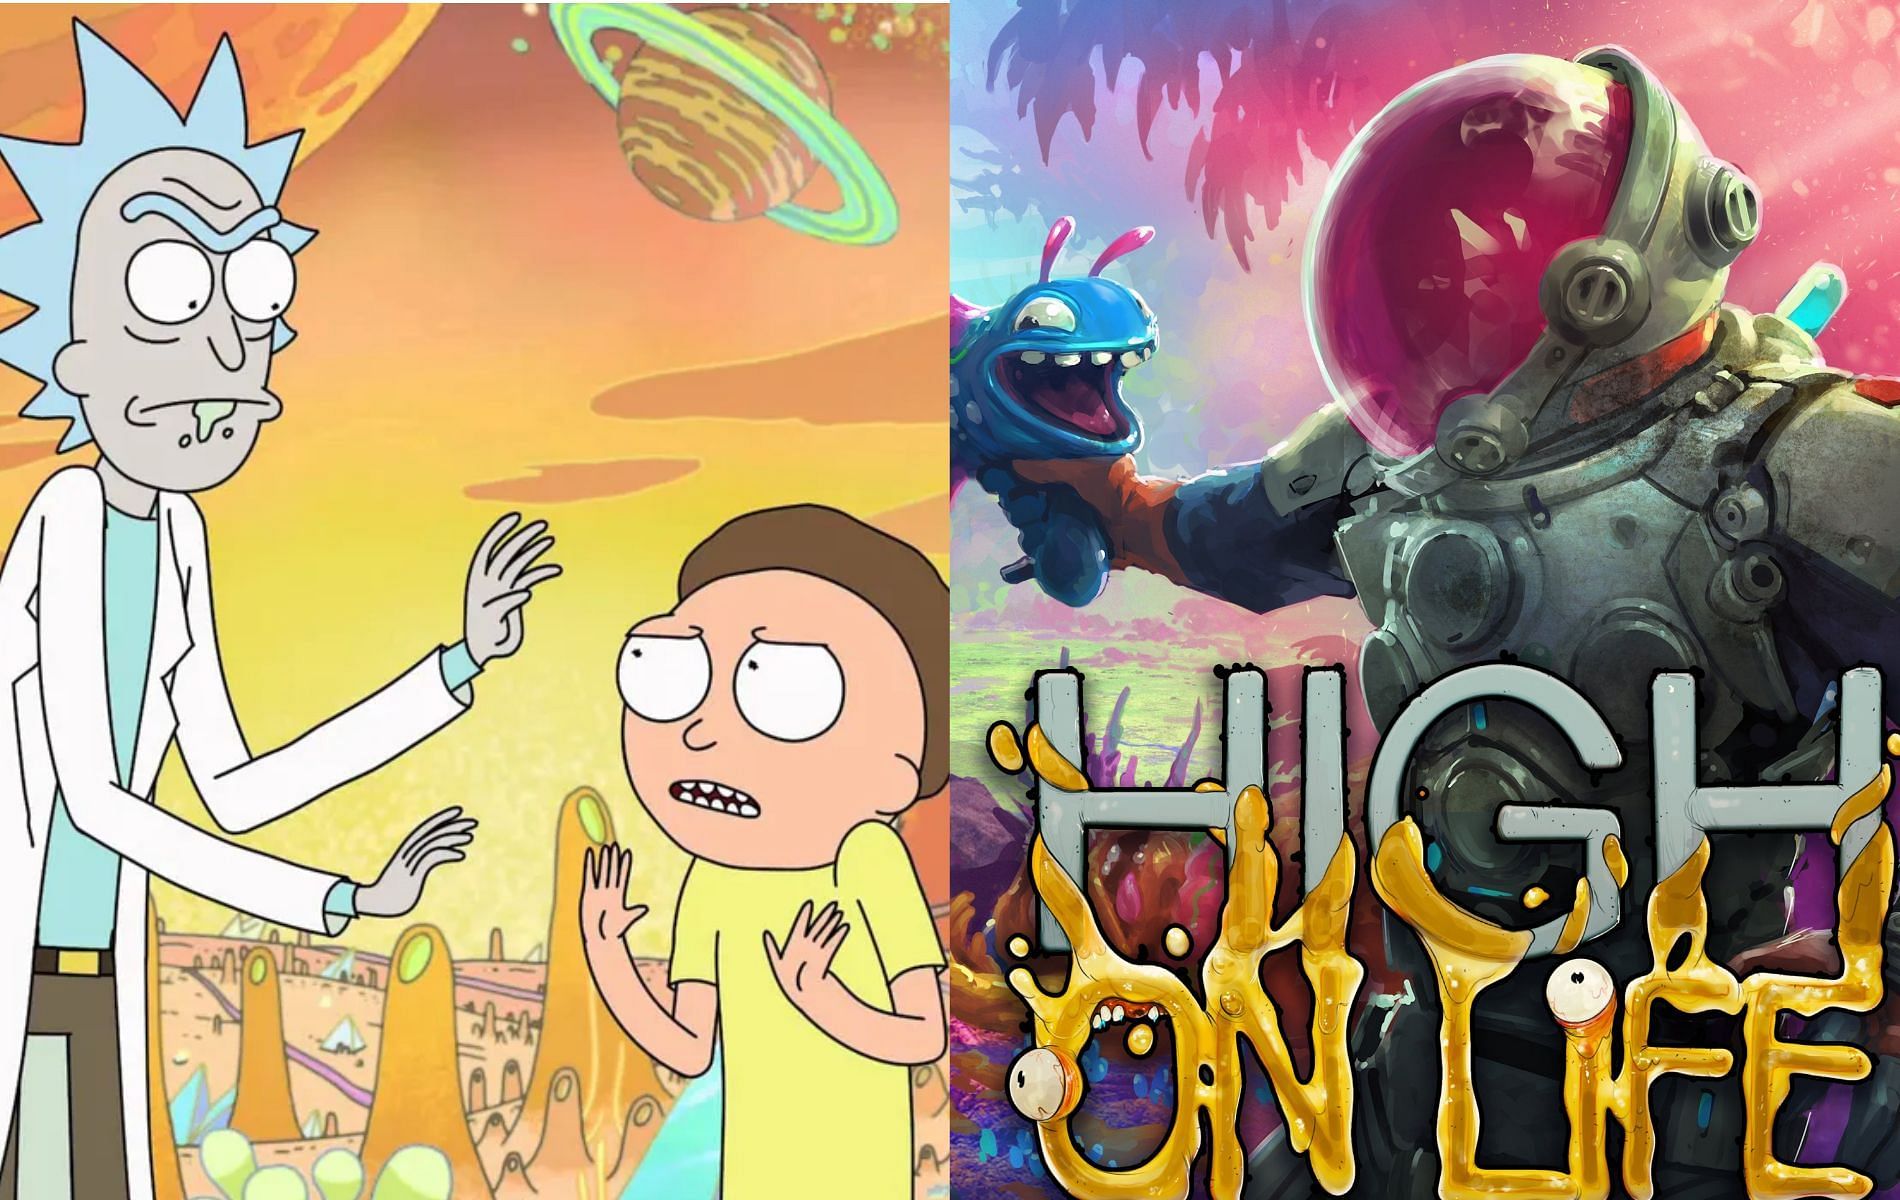 Justin Roiland&rsquo;s biopunk shooter promises to be an epic space adventure (Images via Adult Swim and Squanch Games)